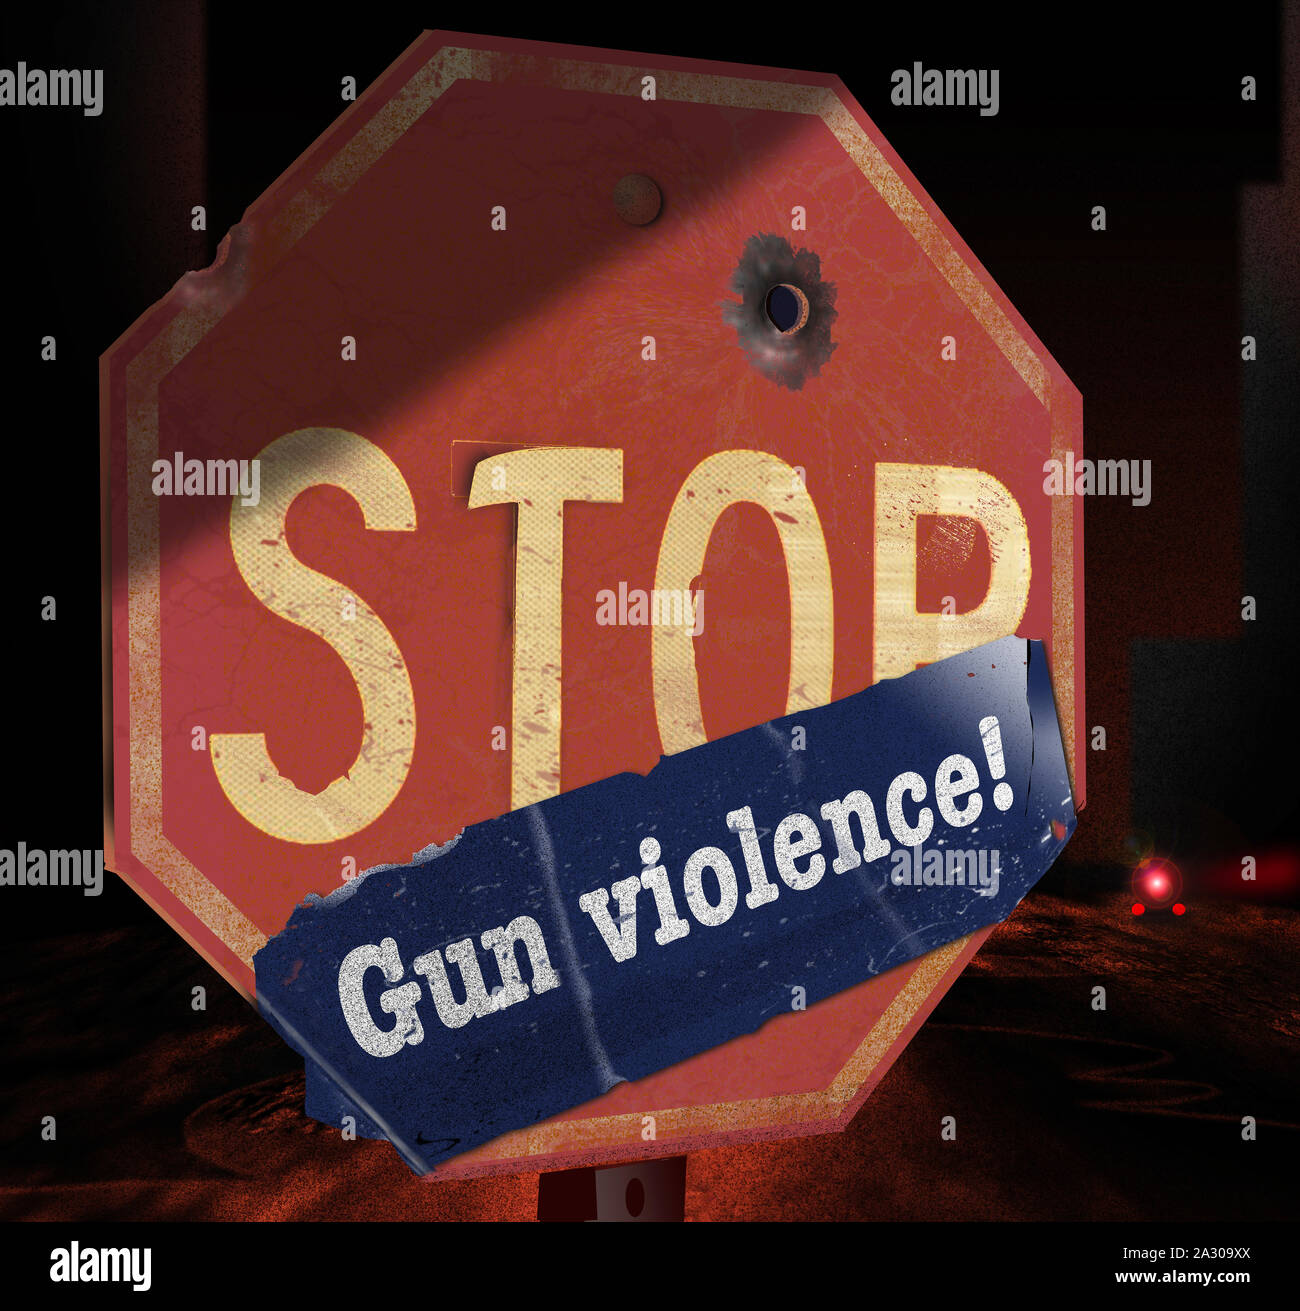 An old stop sign with a bullet hole has a bumper sticker that reads: “Gun violence” to make the message: Stop gun violence. It is a night time scene a Stock Photo